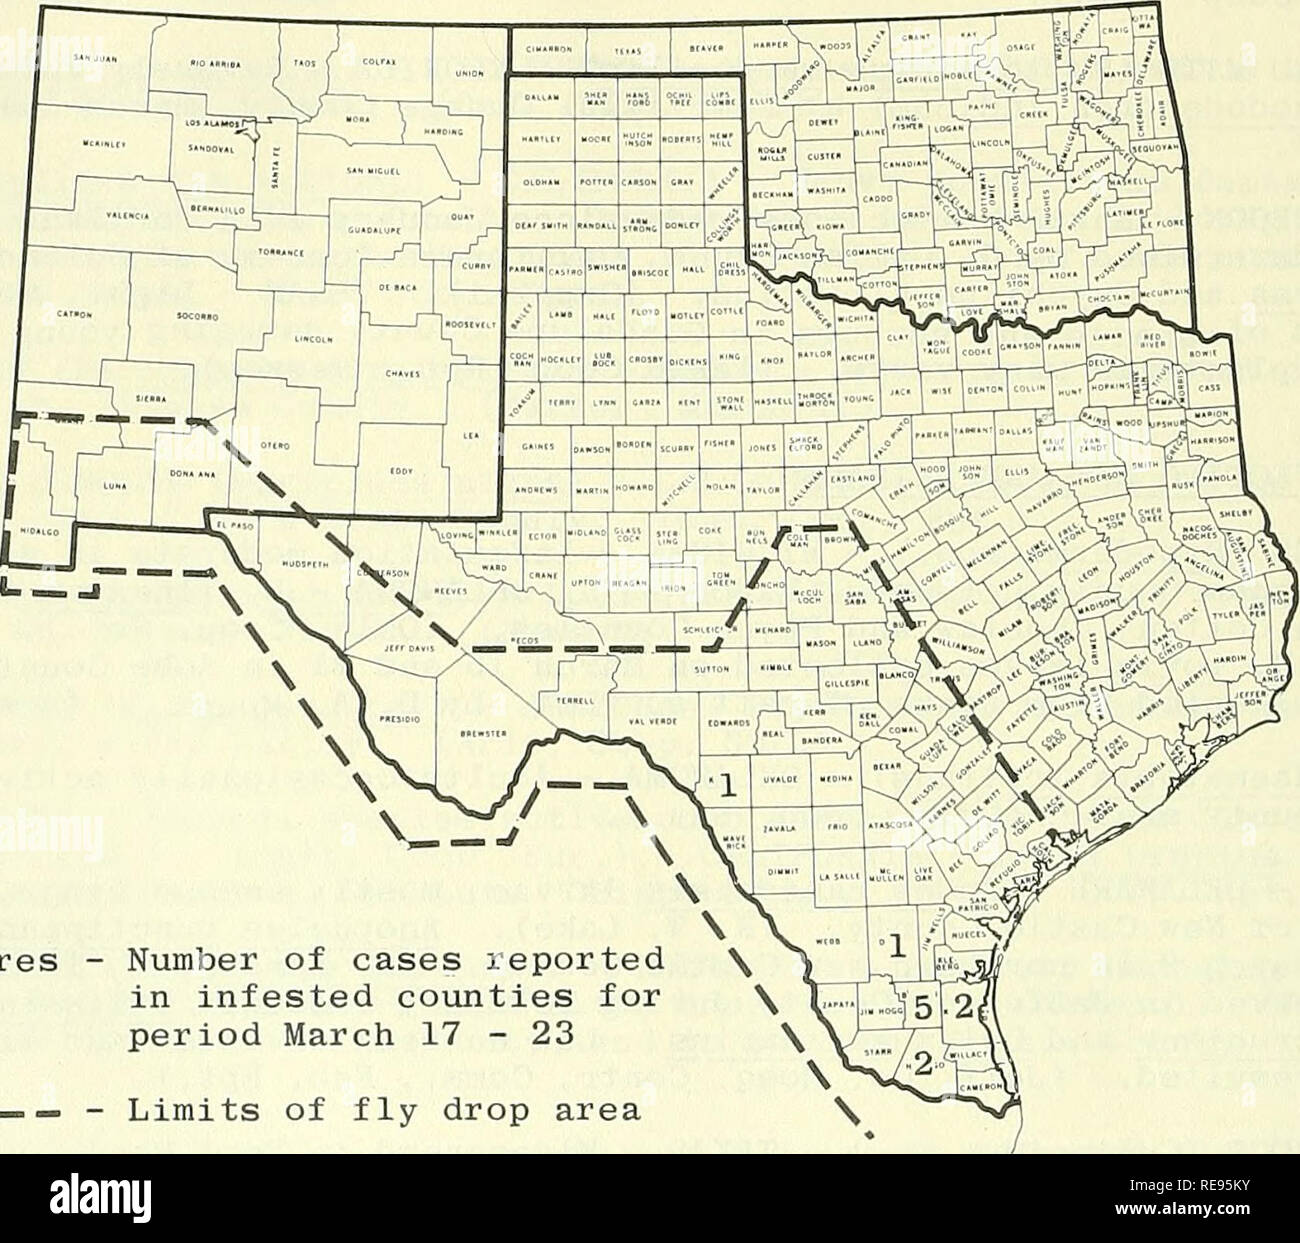 . Cooperative economic insect report. Beneficial insects; Insect pests. 286 - STATUS or THE SCREW-WORM (Cochliomyia hominivorax) IN THE SOUTHWEST During the period March 17-23, a total of 11 cases were identified. An additional screw-worm case was found in Kinney County, TEXAS, about 20 miles from the Rio Grande and about 20 miles from the previously reported Kinney County case. Screw-worm was also found during this period in Brooks, Kenedy, Hidalgo and Duval Counties. The specimen from Duval County is the first from that county since January 17, 1963. A total of 98 million sterile screw-worm  Stock Photo